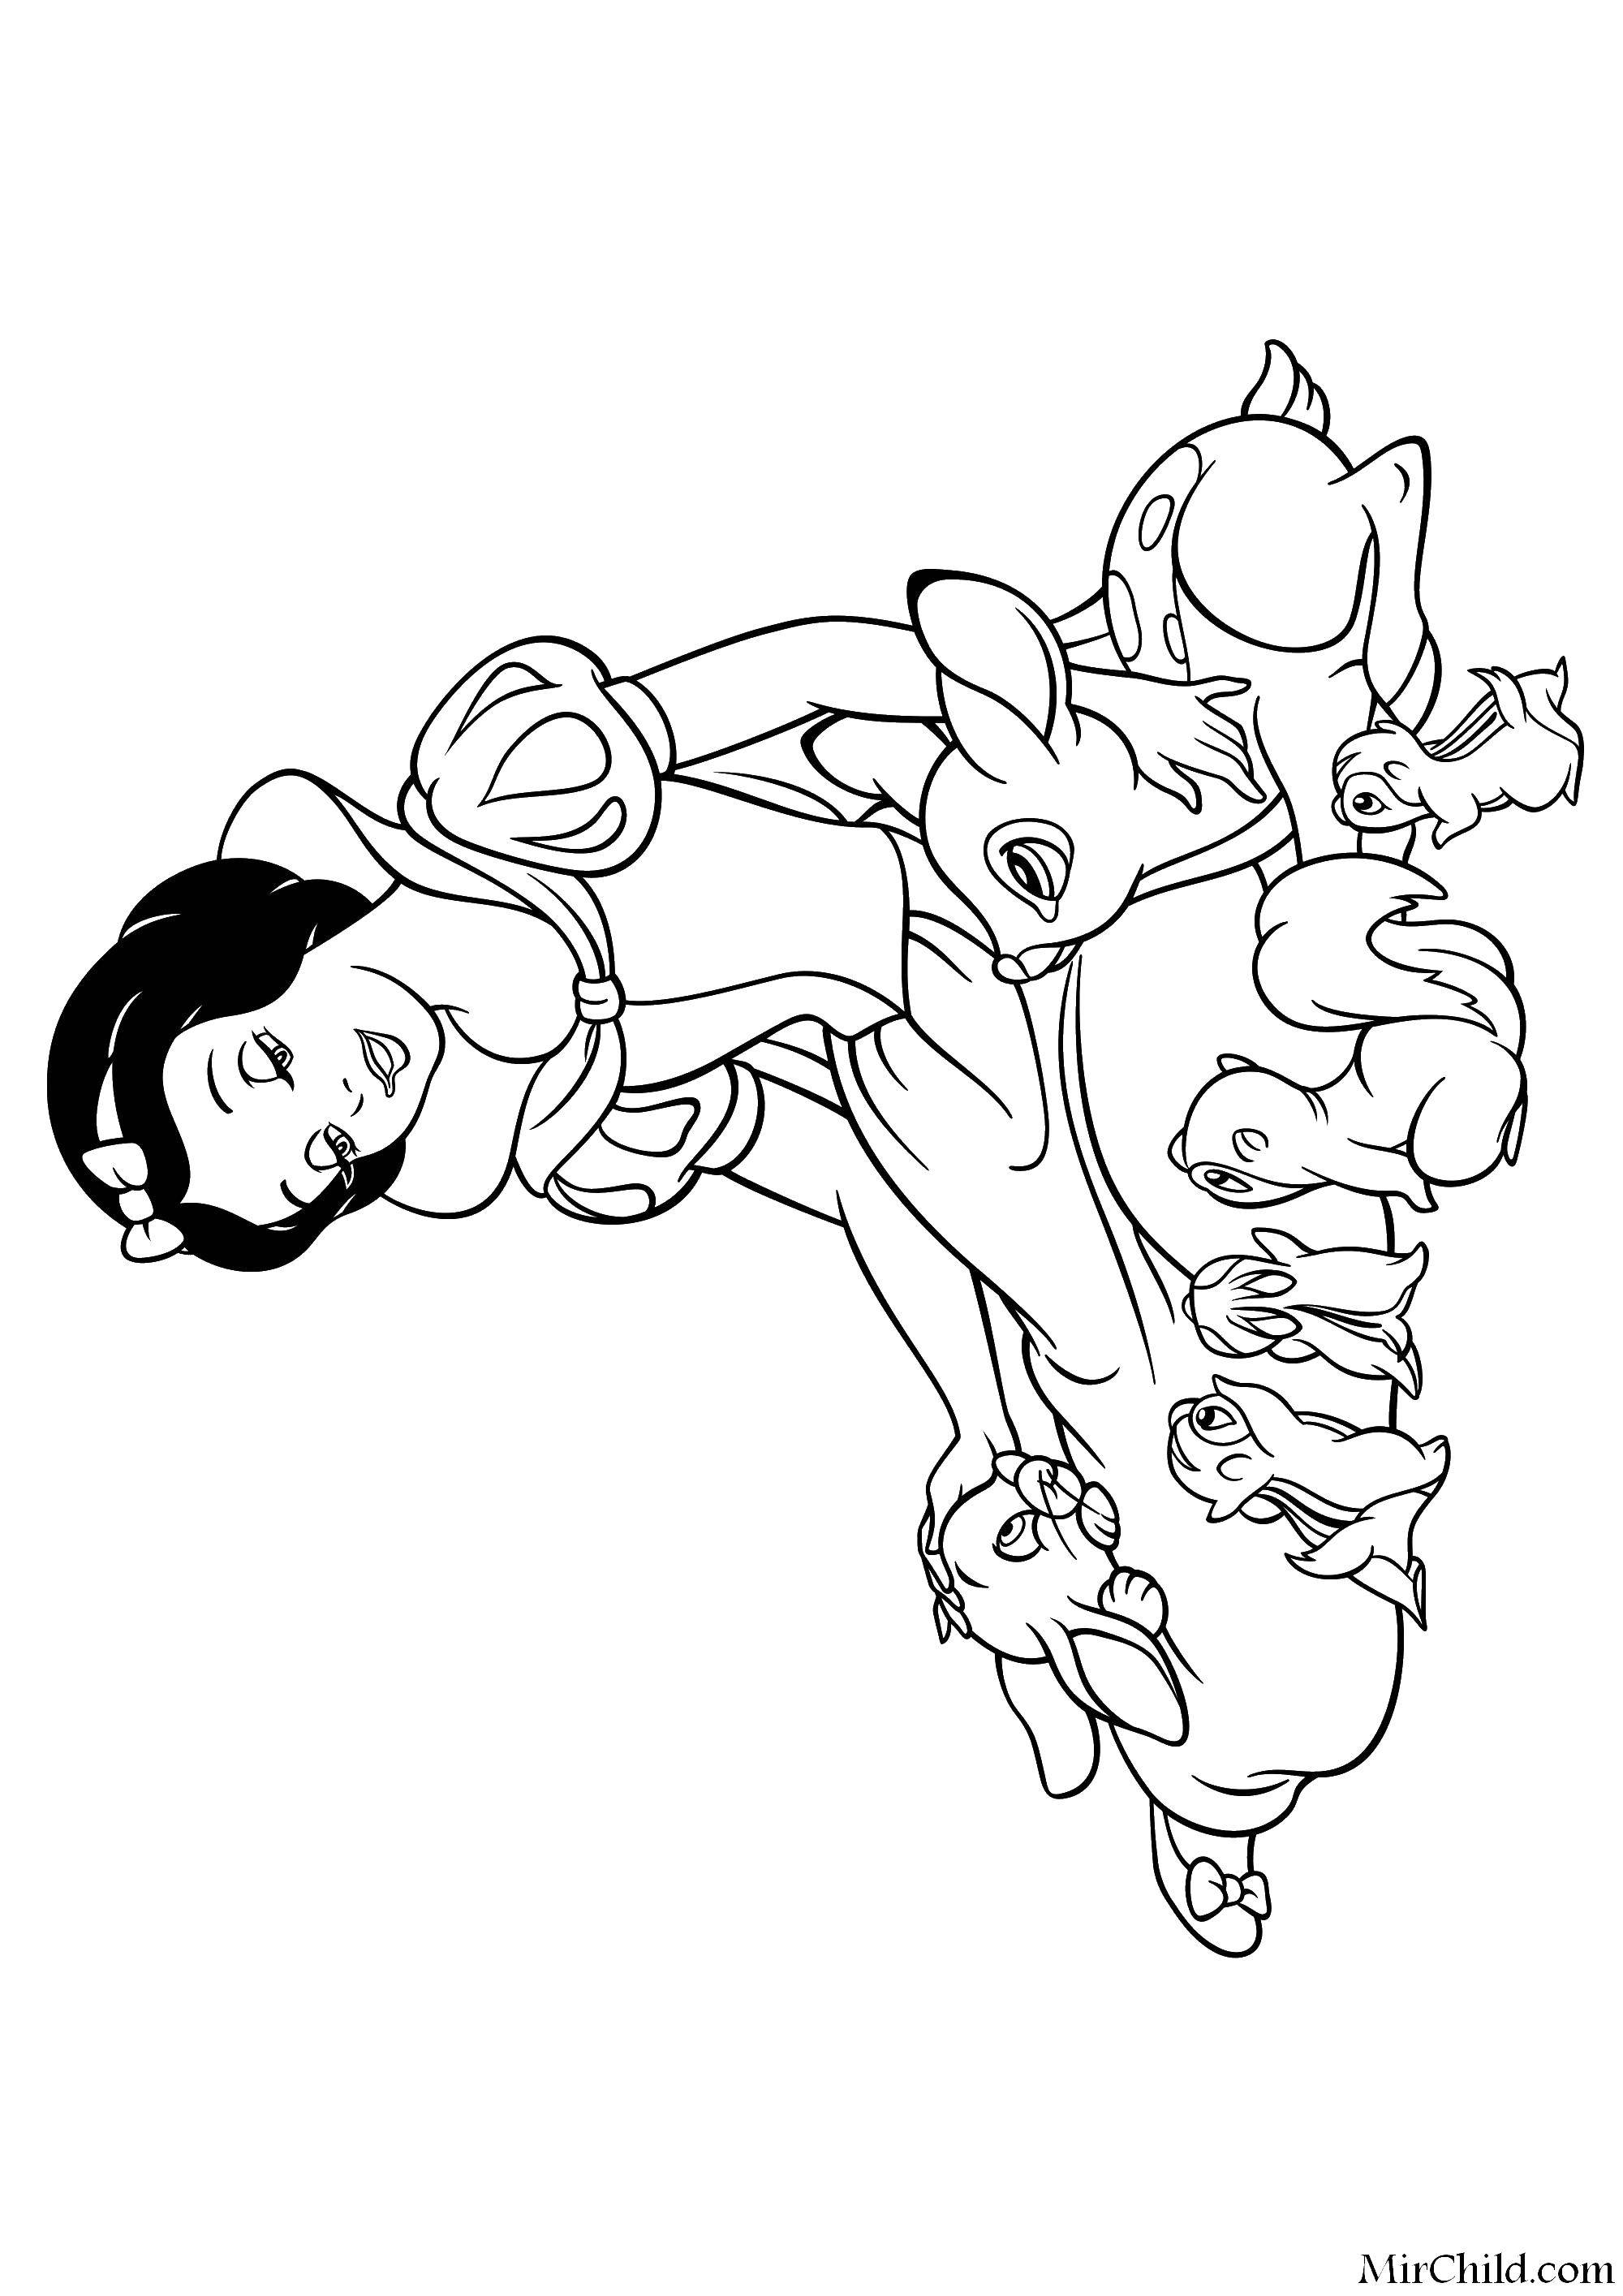 Coloring Snow white and animals. Category snow white. Tags:  Snow white, hare, deer, birds.